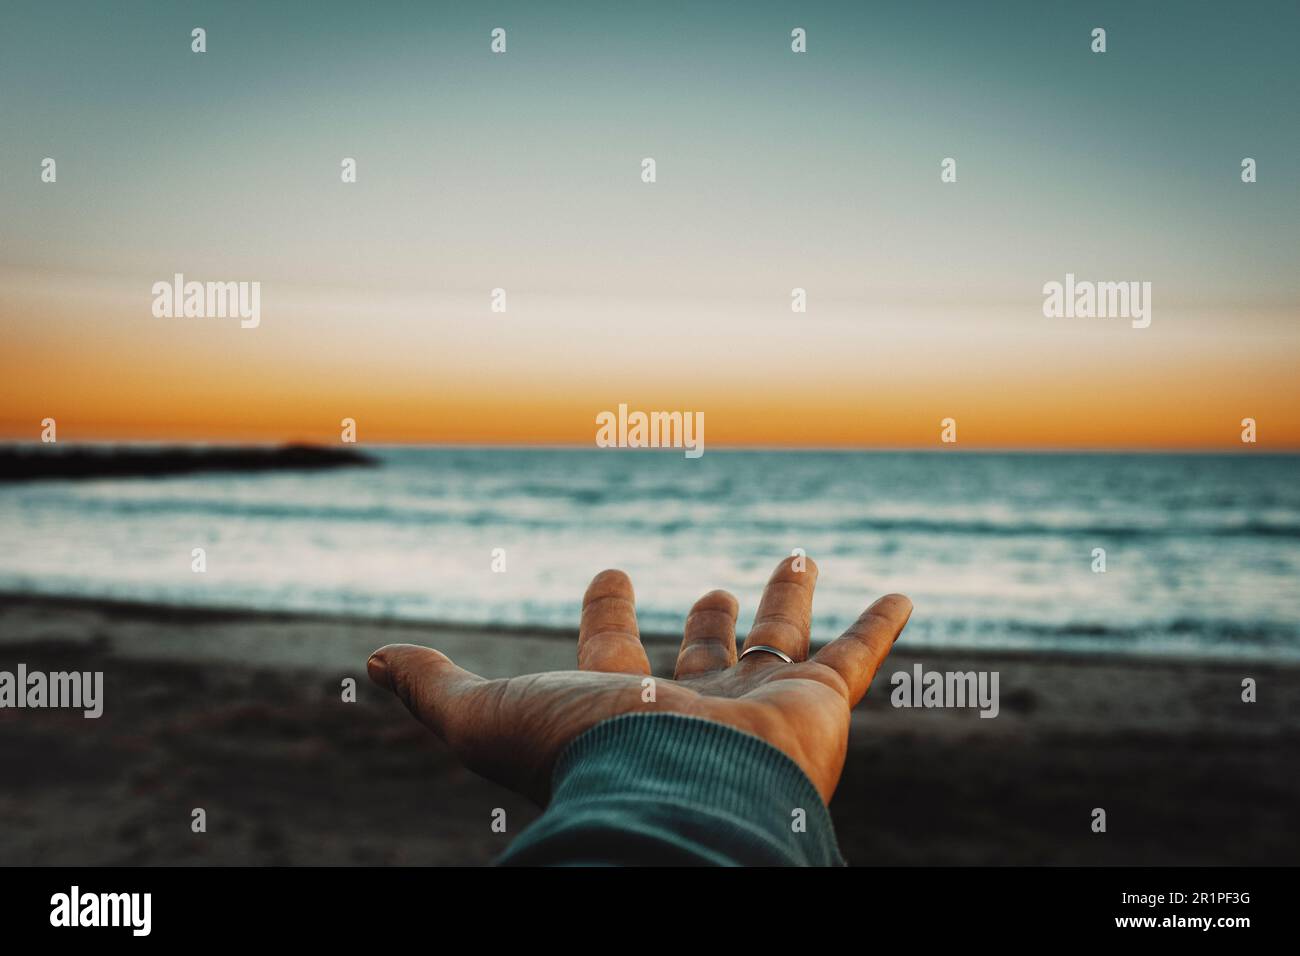 Pov of man hand opened and beautiful sunset lights with ocean and sky in background. Focus in foreground. Concept of mankind and nature. People and travel adventure lifestyle. Feeling. Love. Sea. Stock Photo